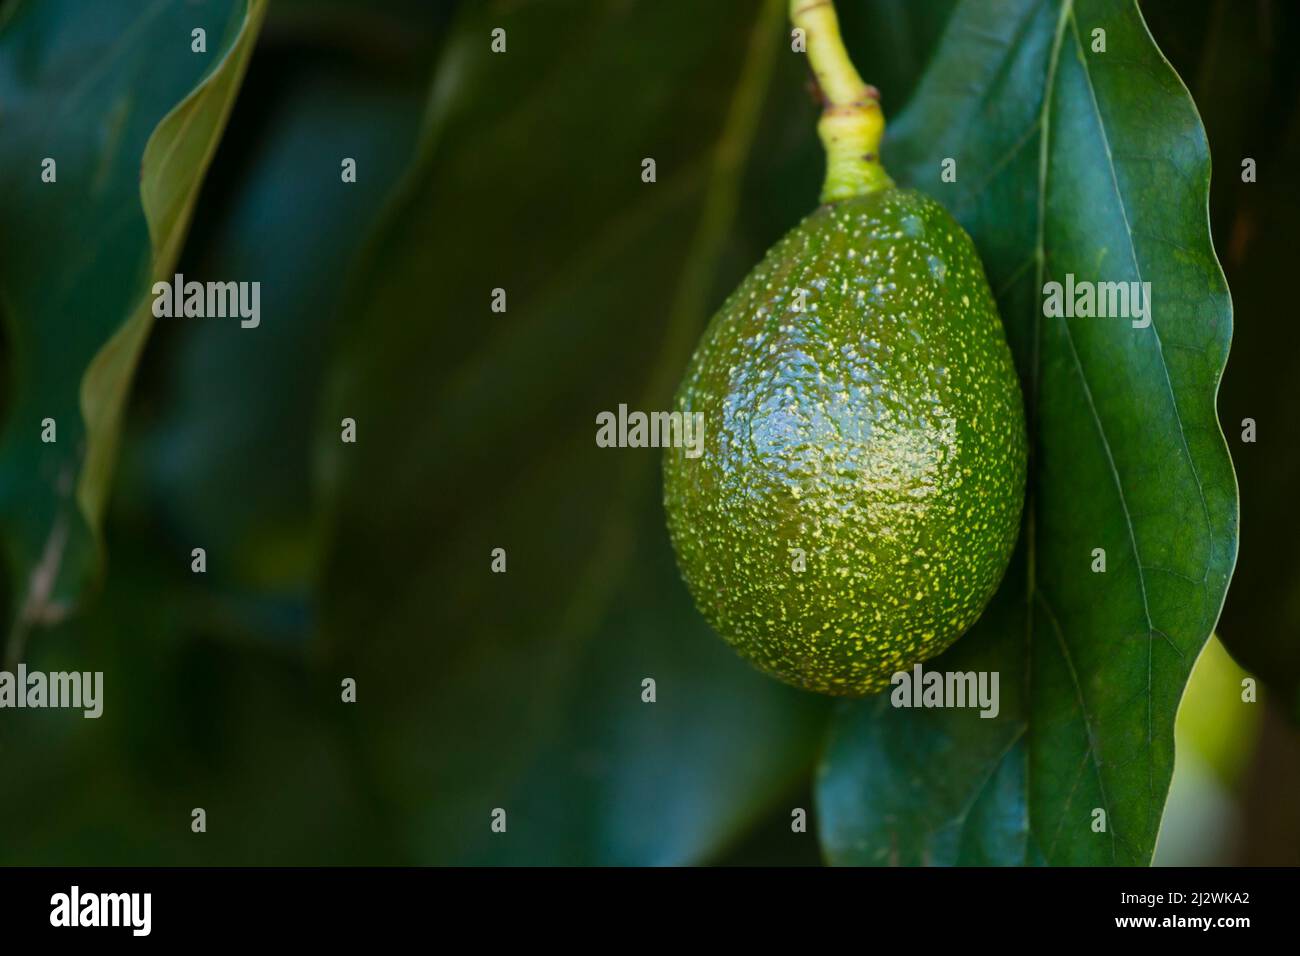 Closeup of some Avocados on a tree in Kenya. Stock Photo